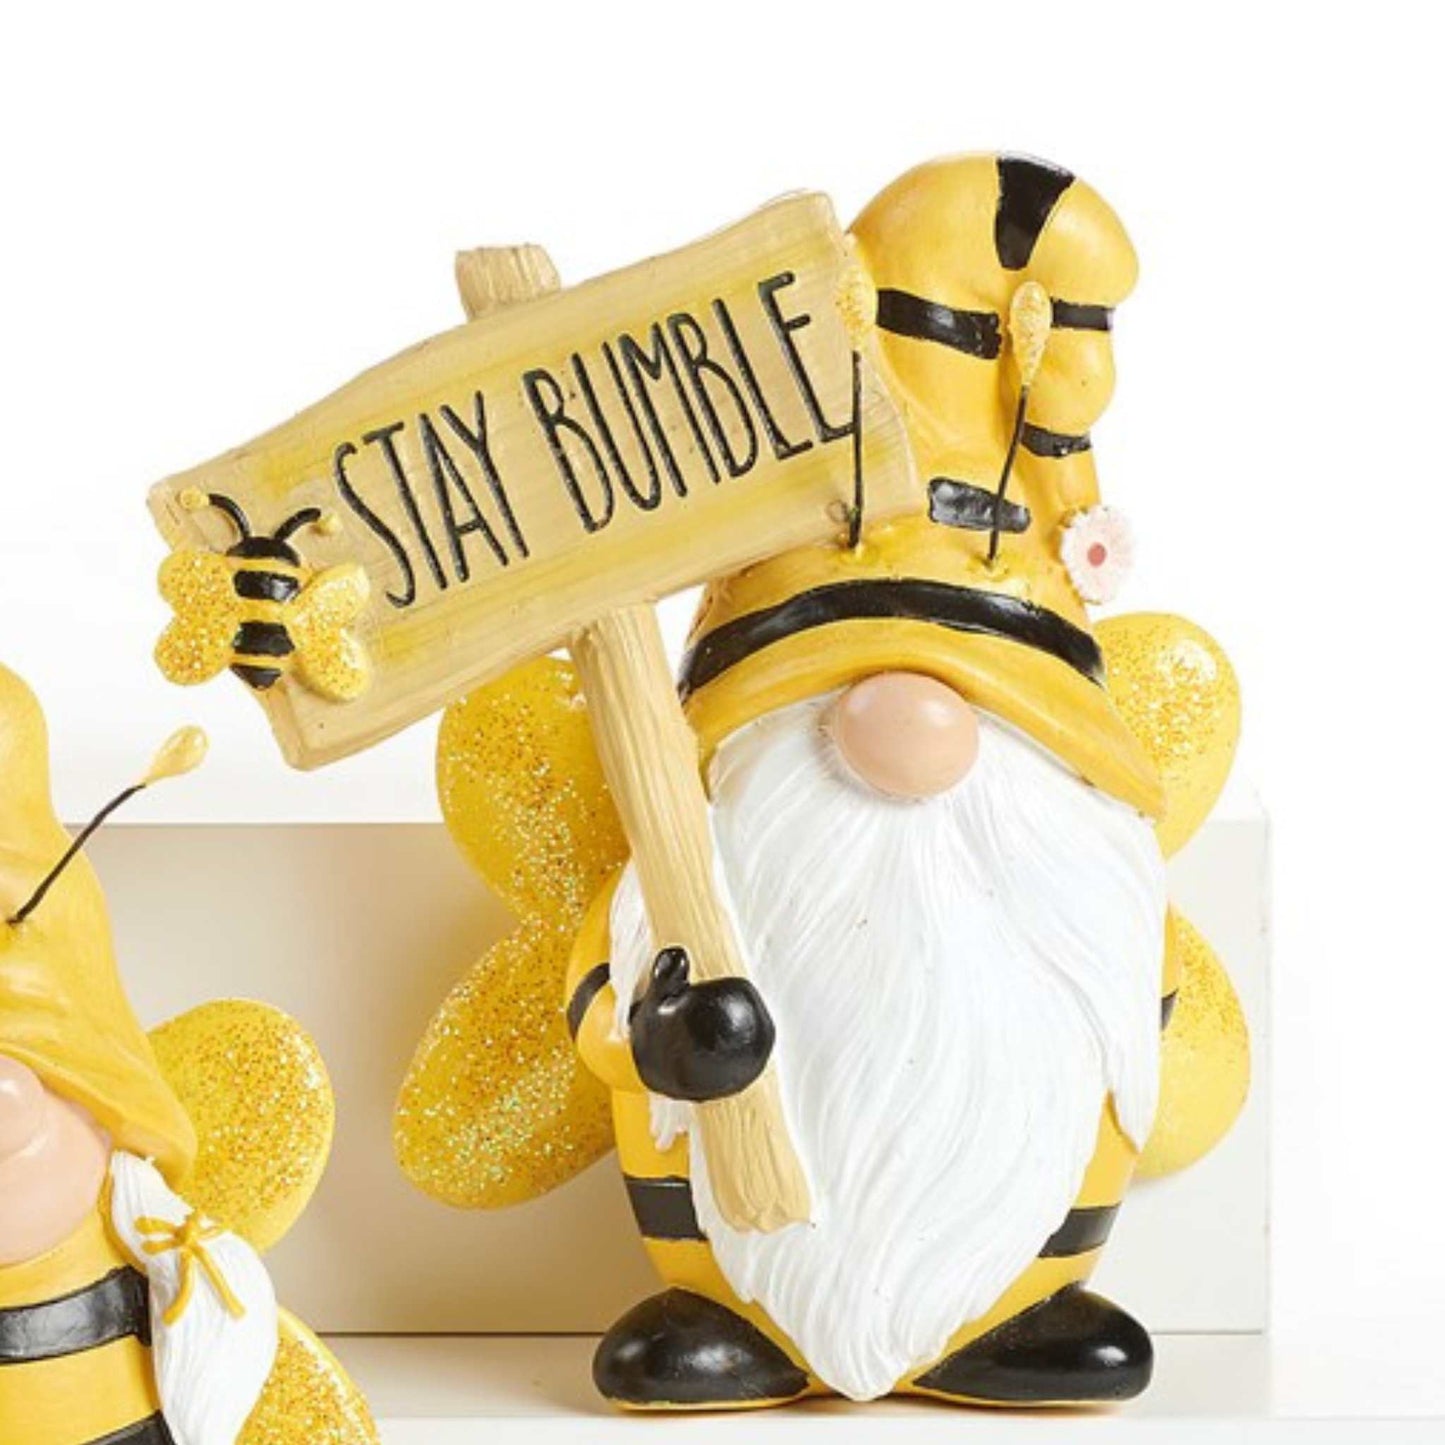 Figurine Stay Bumble Bee Gnome Sentiment Figurines - 4 Different Styles GC-716531-SB